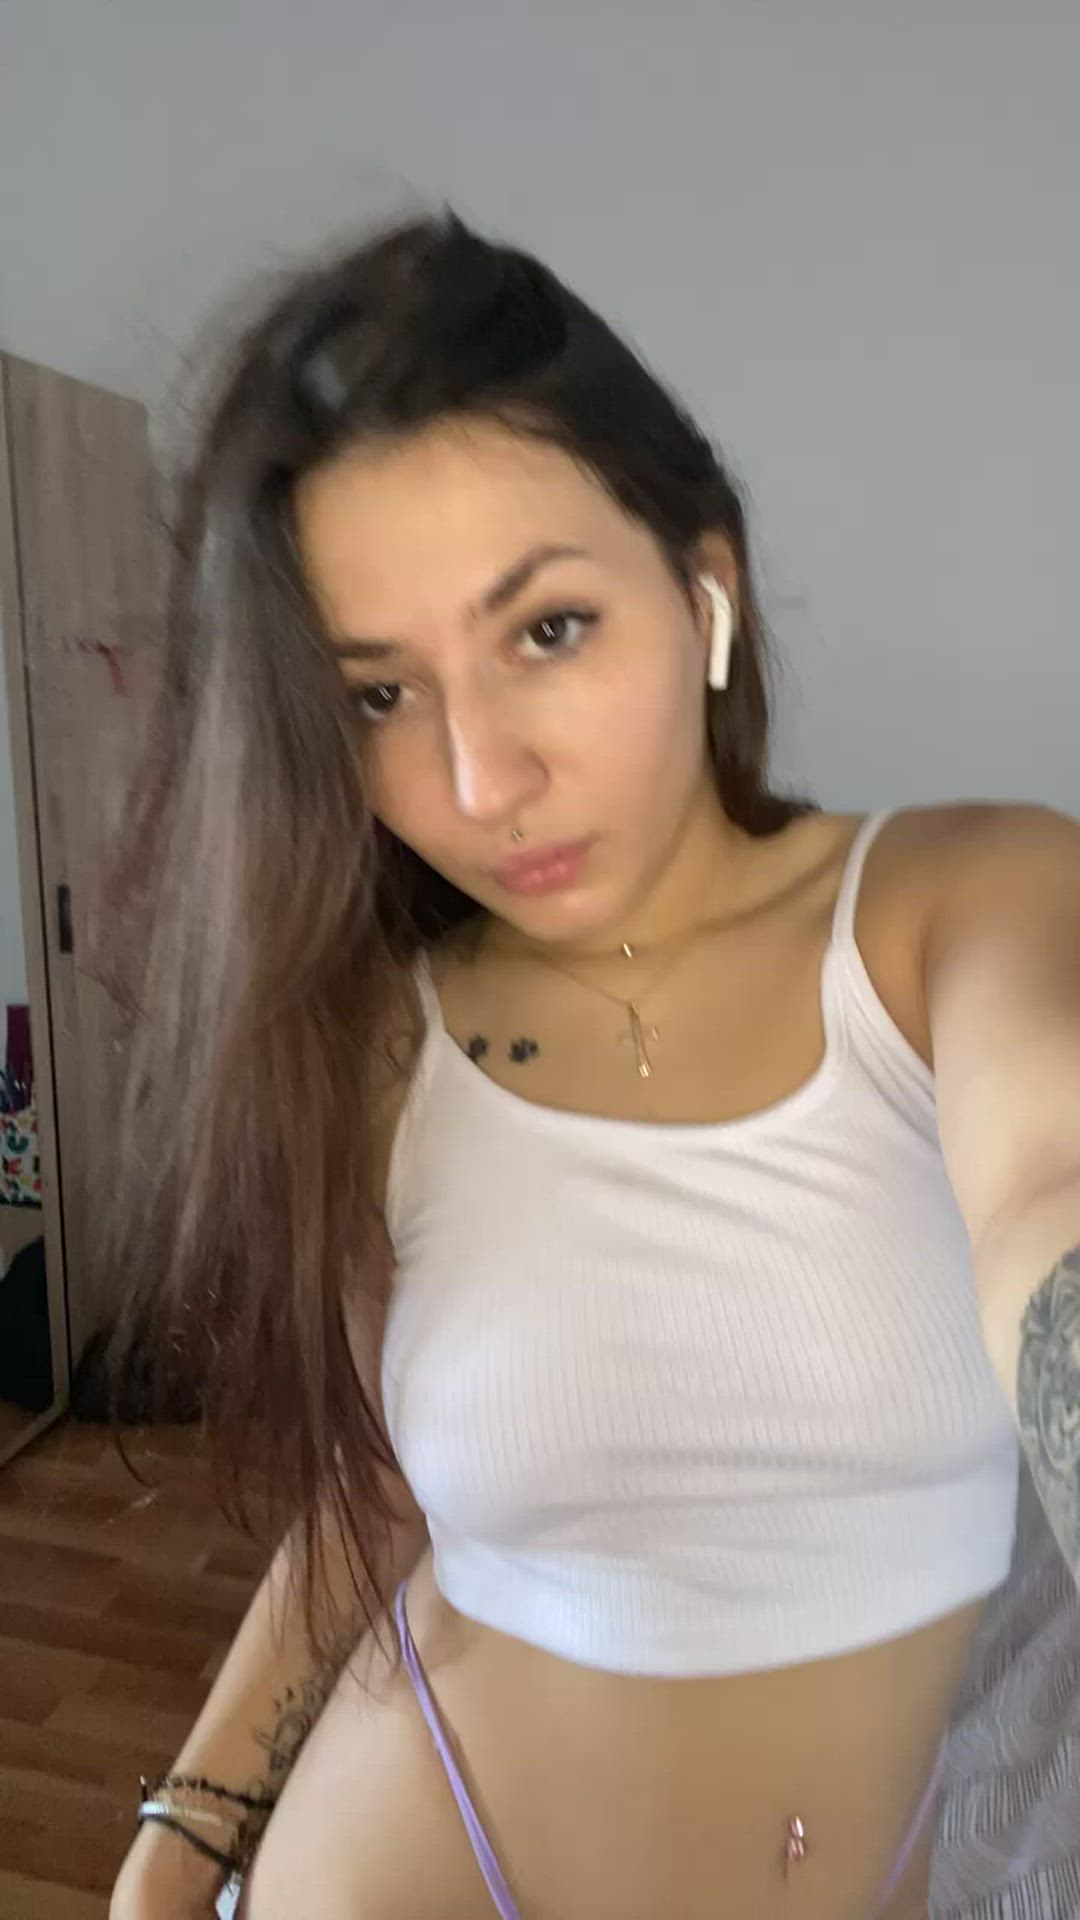 Tits porn video with onlyfans model miamillic <strong>@miamillic</strong>